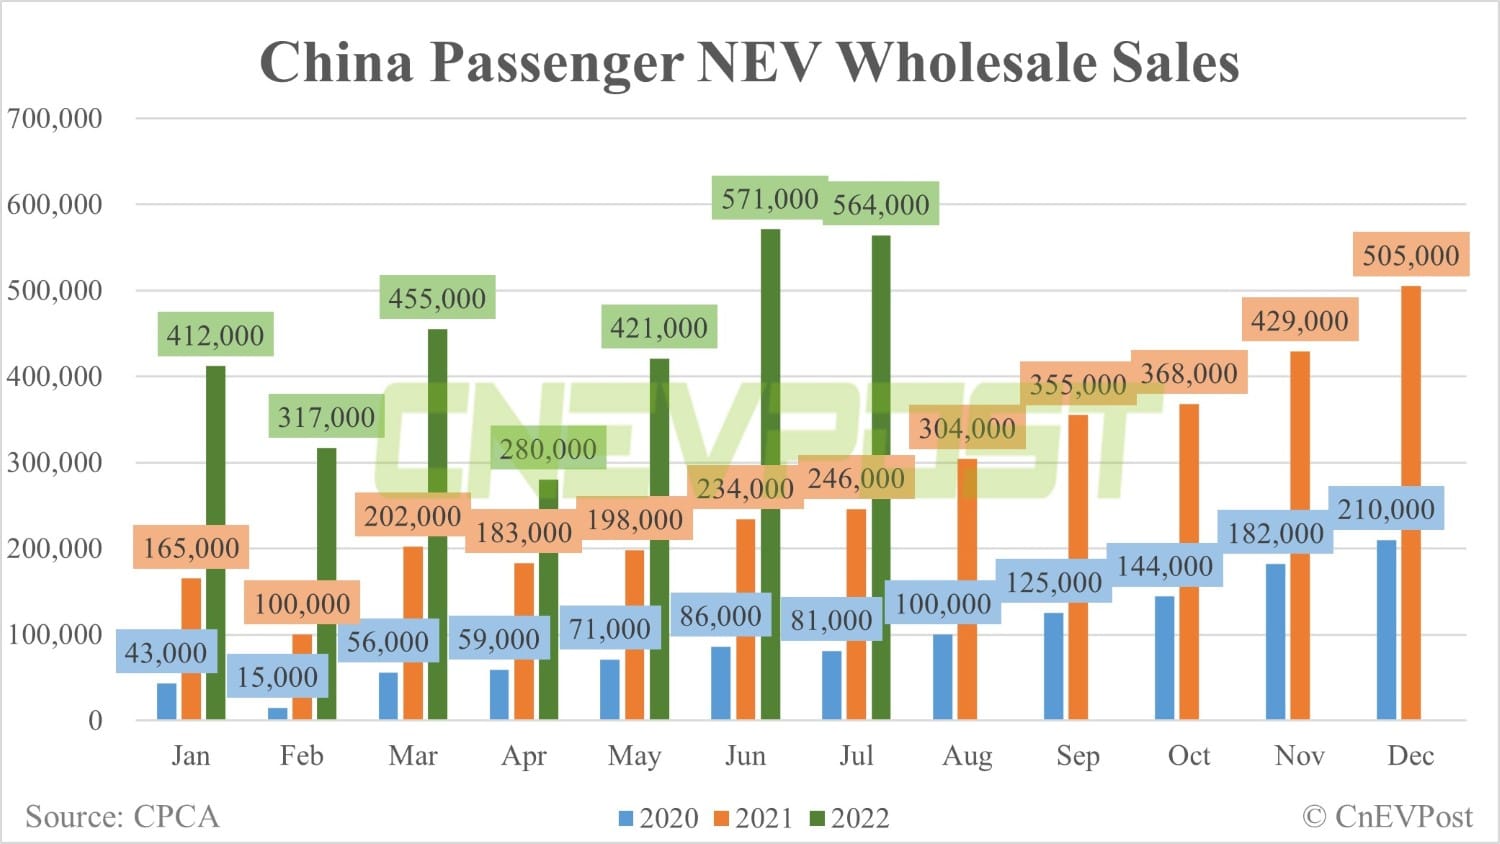 CPCA raises China NEV sales forecast, expects average monthly sales of over 600,000 units in next few months-CnEVPost